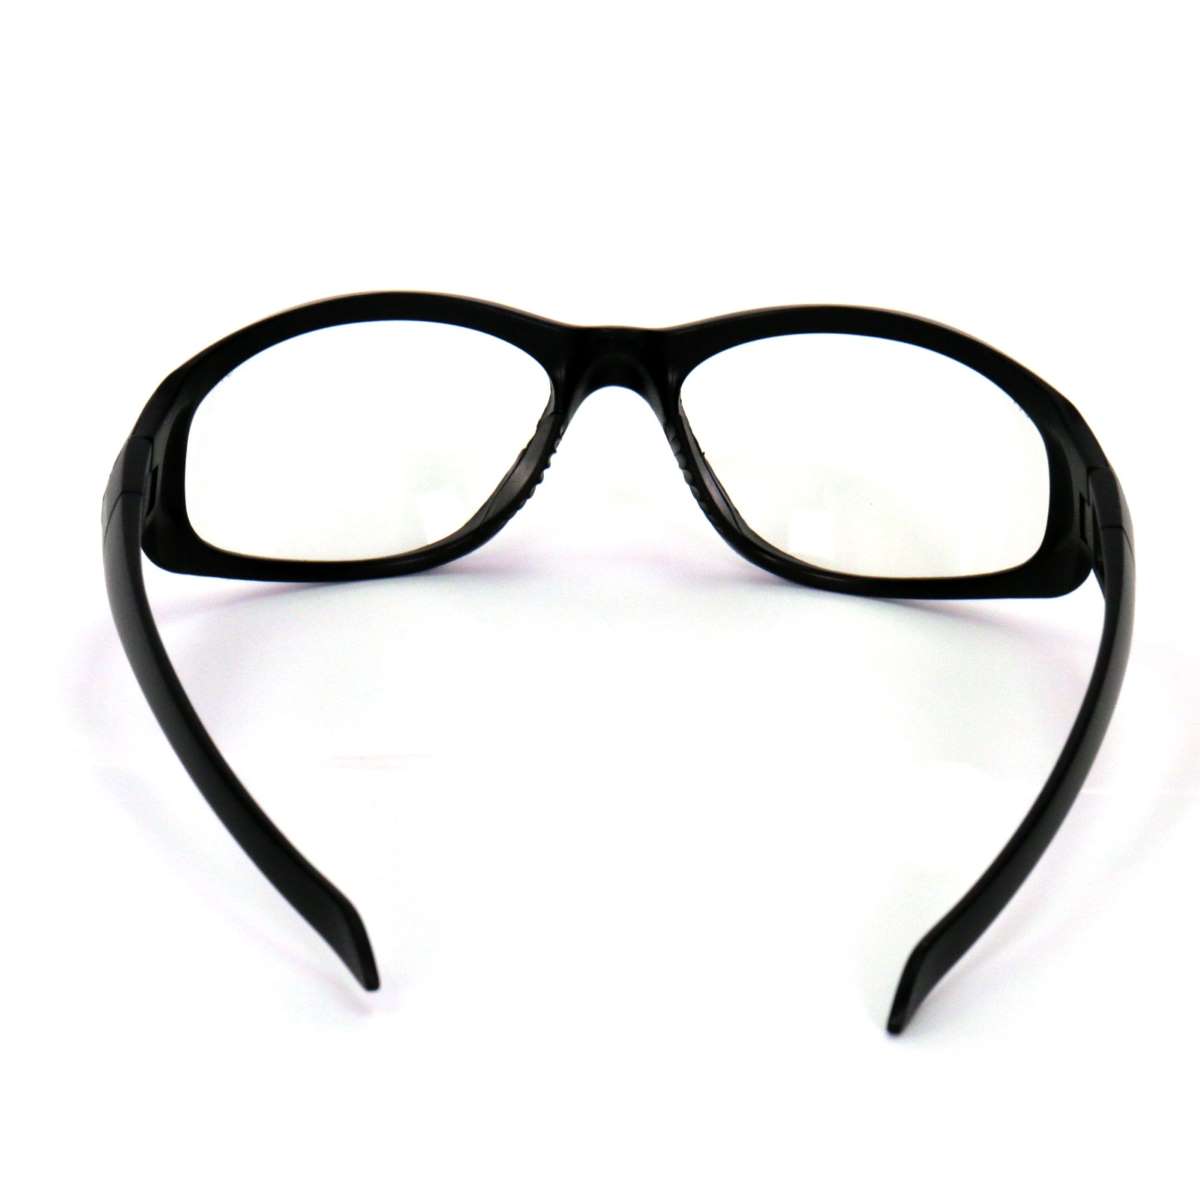 Hot Leathers Safety Hercs Safety Glasses - Clear Lenses SGD1071